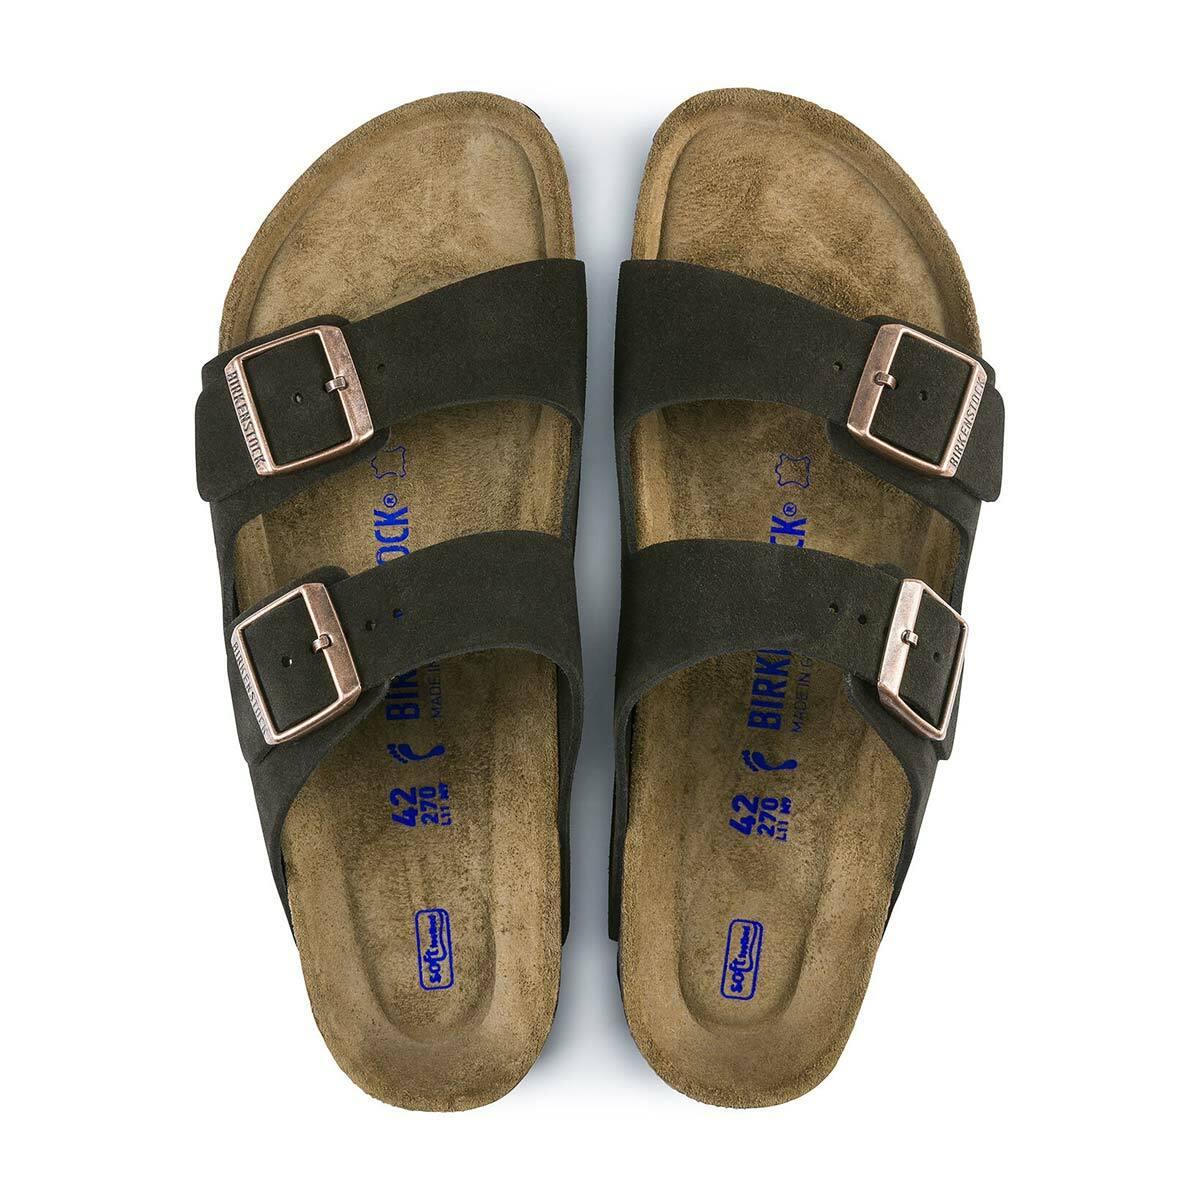 Shop Birkenstock Arizona Suede Leather Soft Footbed Sandals | - The Next Pair